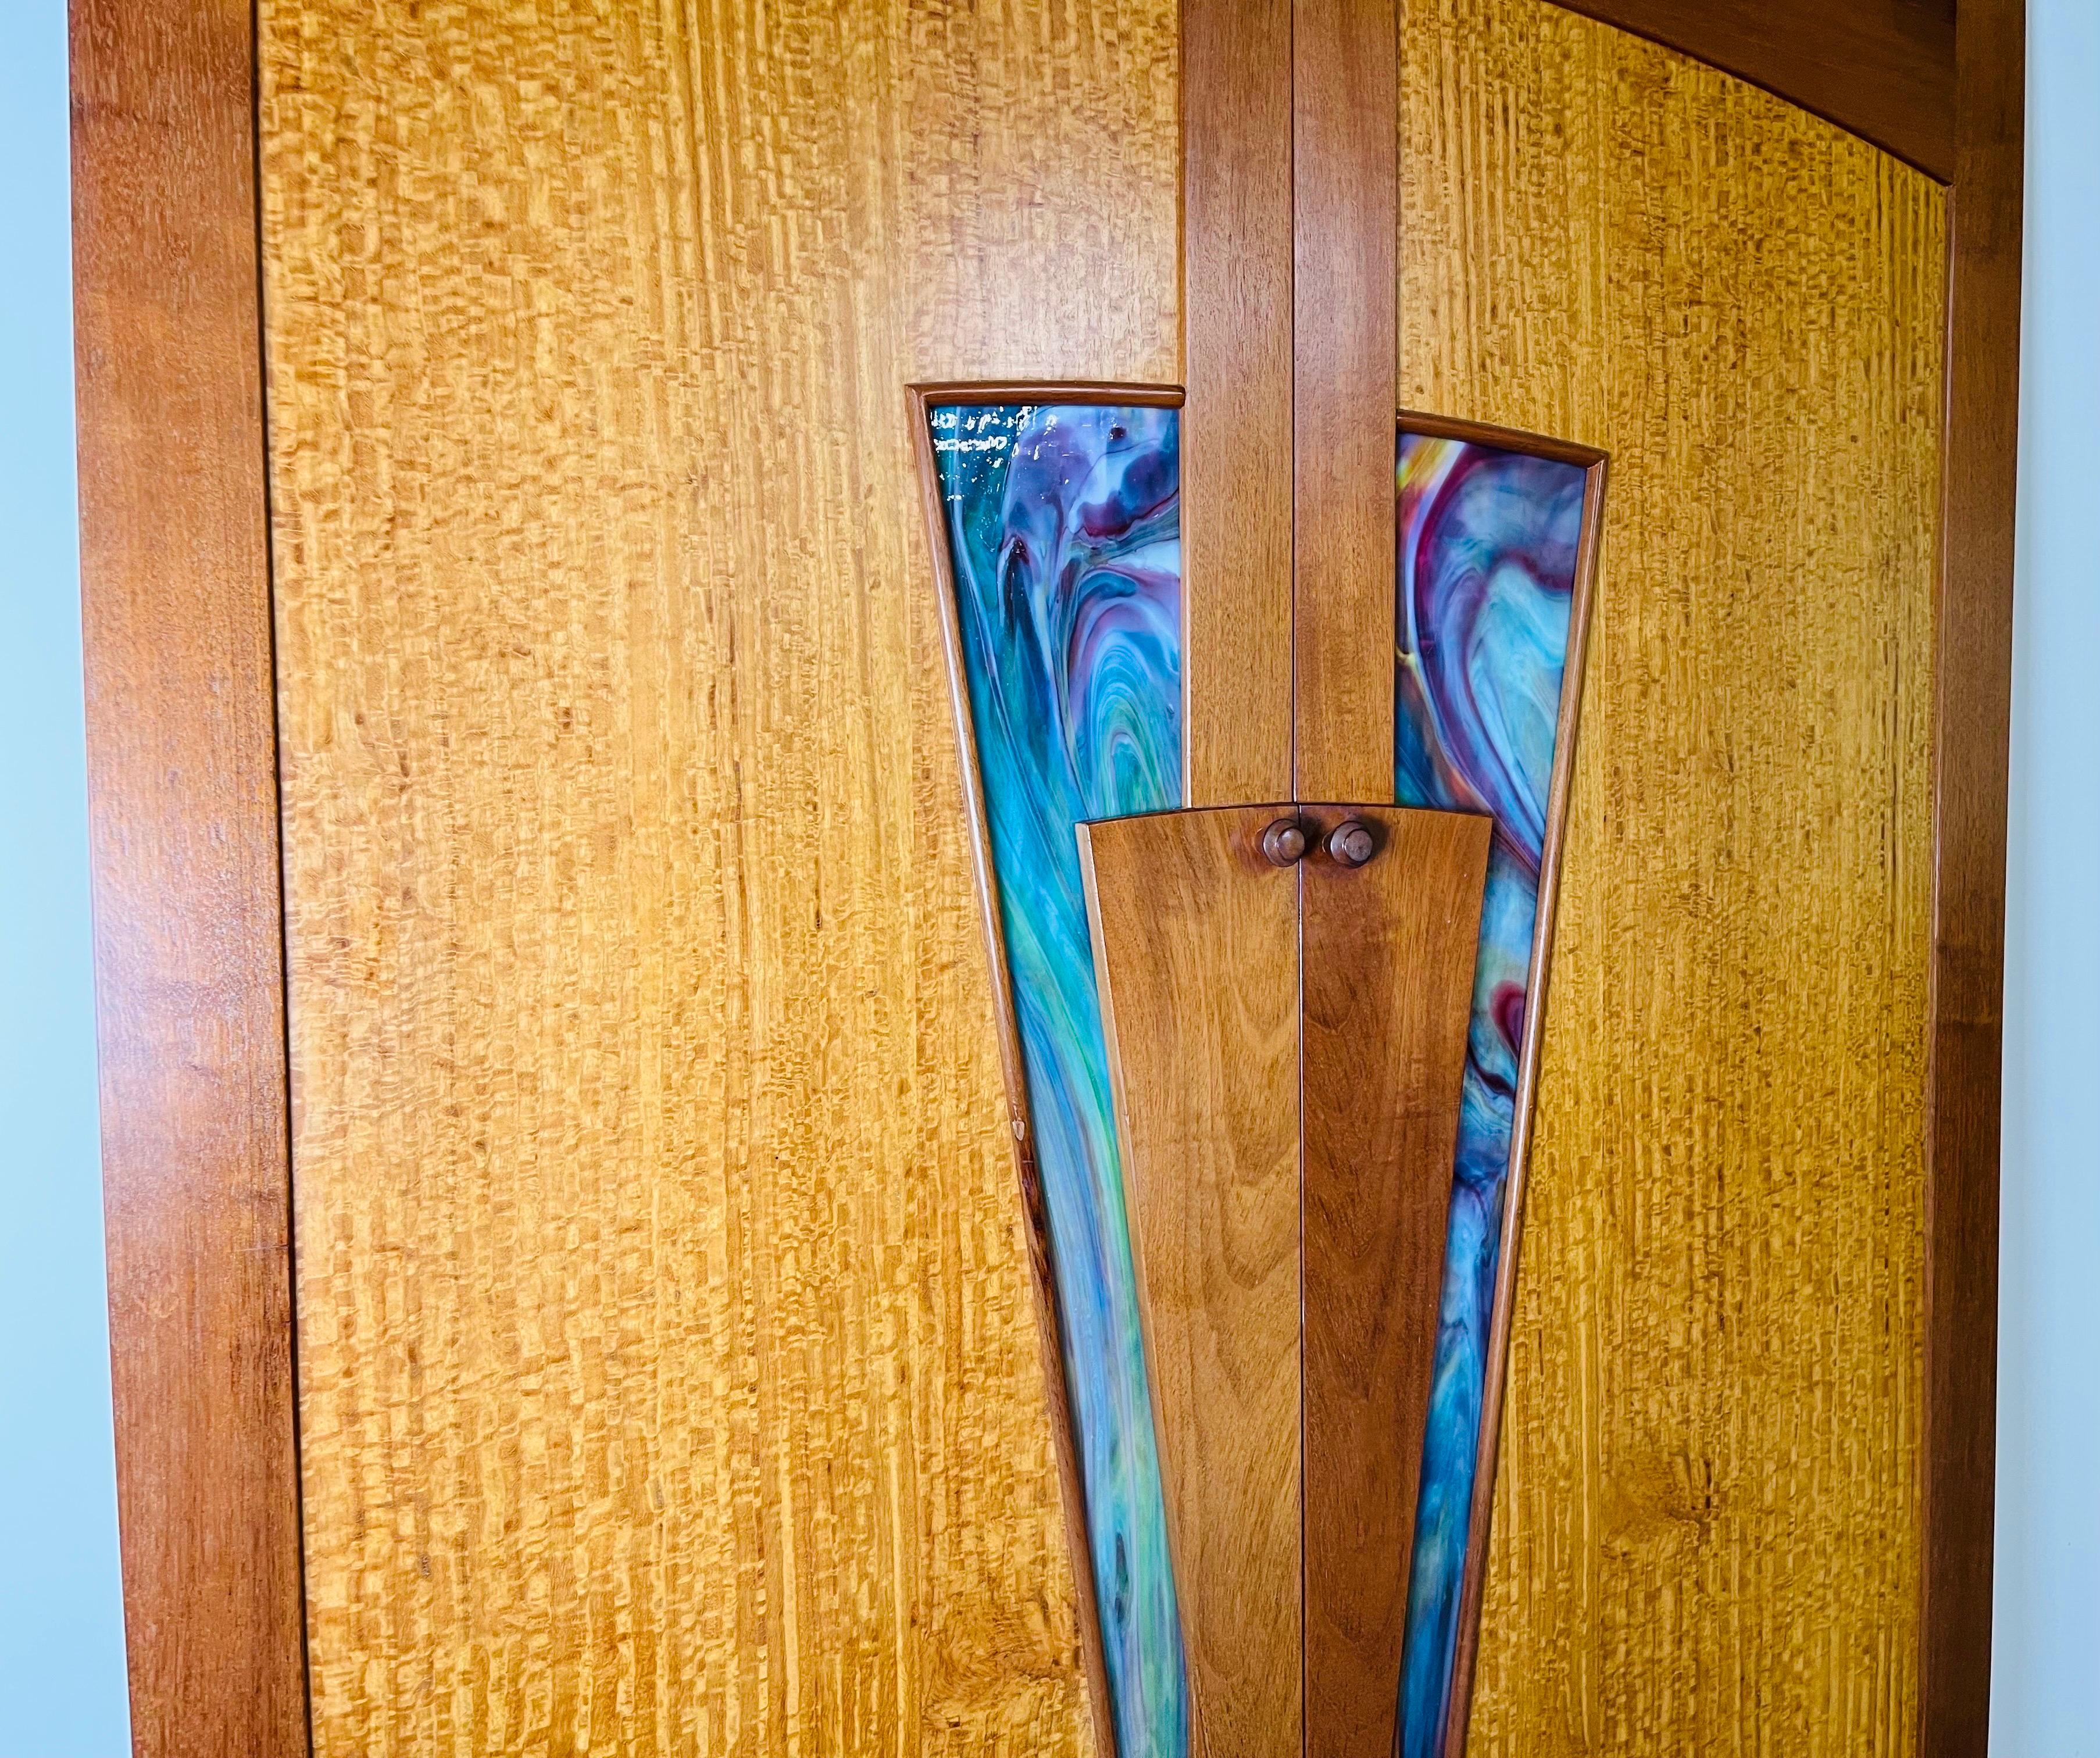 A beautiful pair of apposing custom cabinet doors in the manner of Wharton Esherick having custom stained glass with Cherry, Birdseye Maple and Maple construction. Beautiful carved angles frame the stained glass giving the doors stunning lines. The